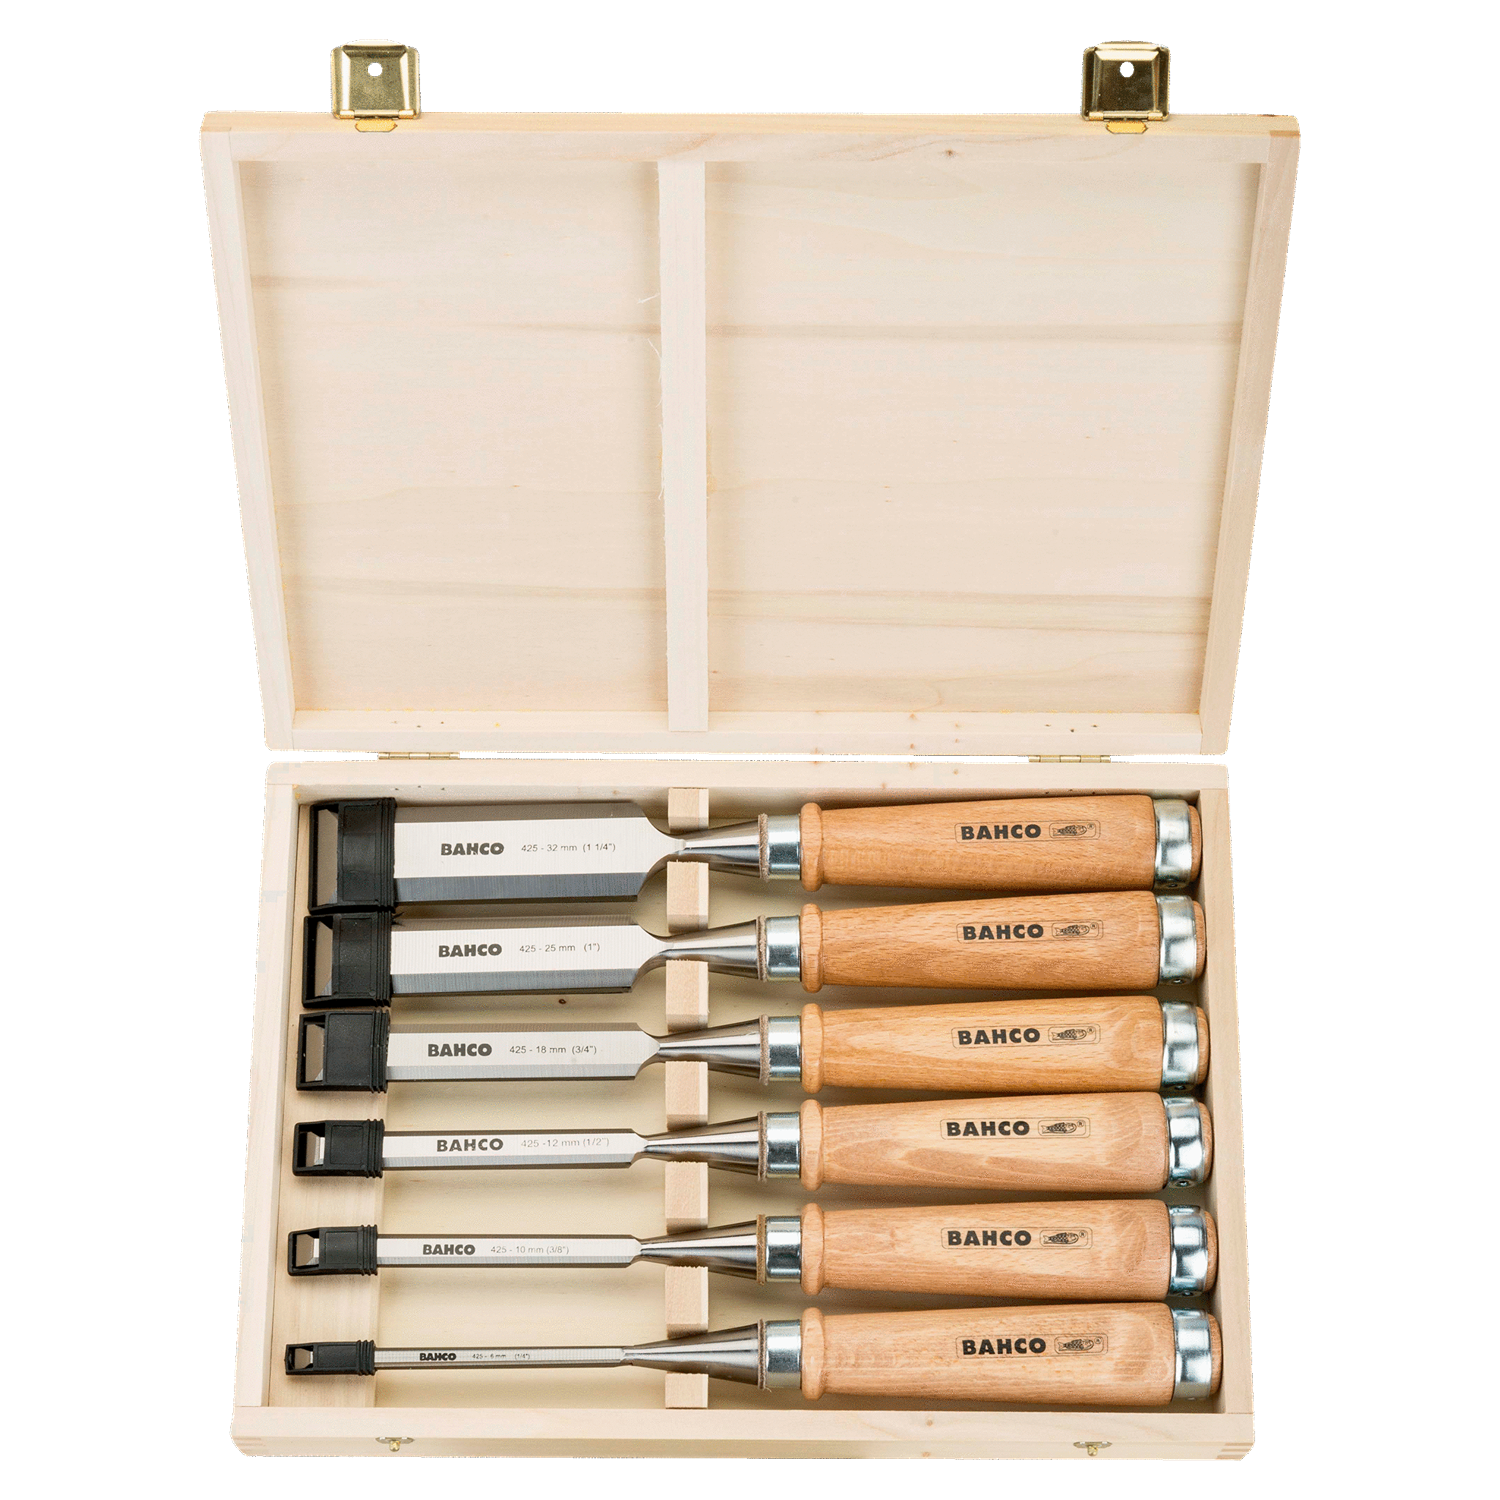 BAHCO 425-083 Chisel Set with Wooden Handle - 6 Pcs/ Wooden Box - Premium Chisel Set from BAHCO - Shop now at Yew Aik.